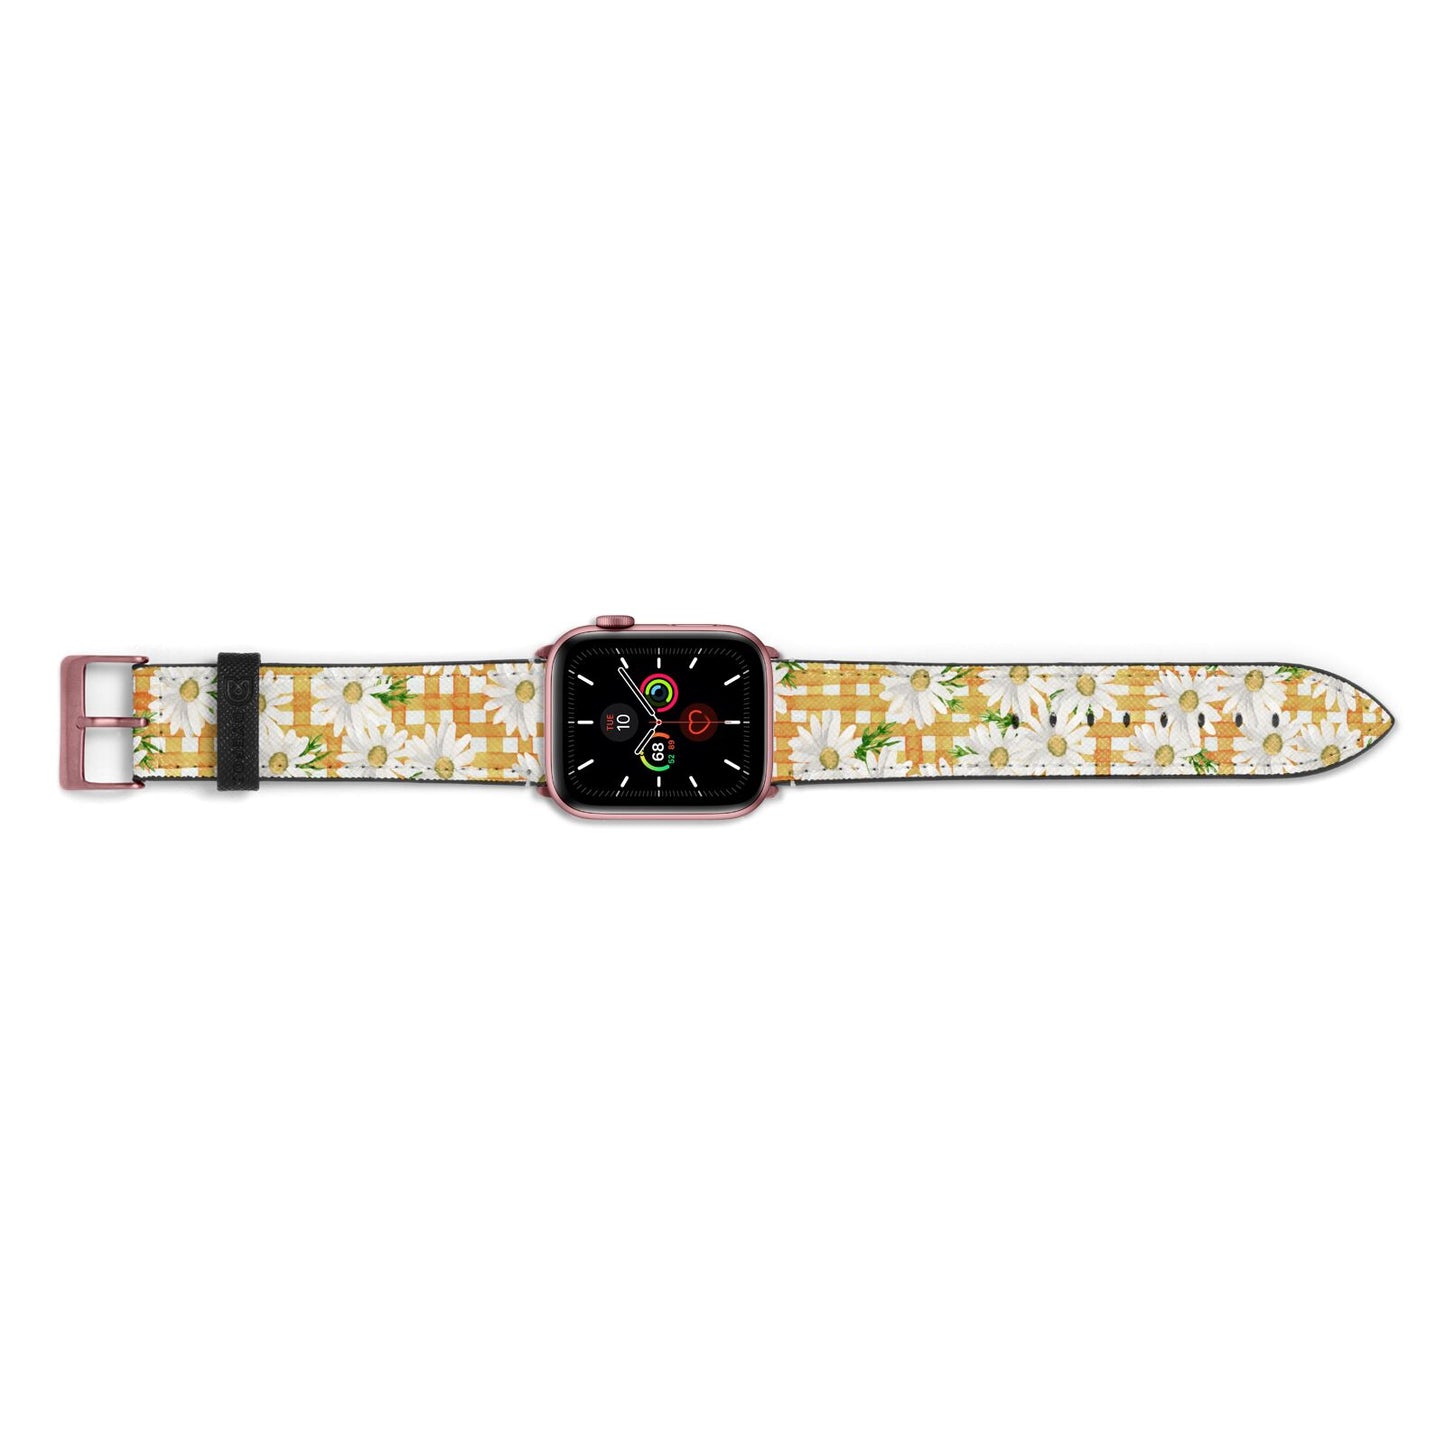 Checkered Daisy Apple Watch Strap Landscape Image Rose Gold Hardware